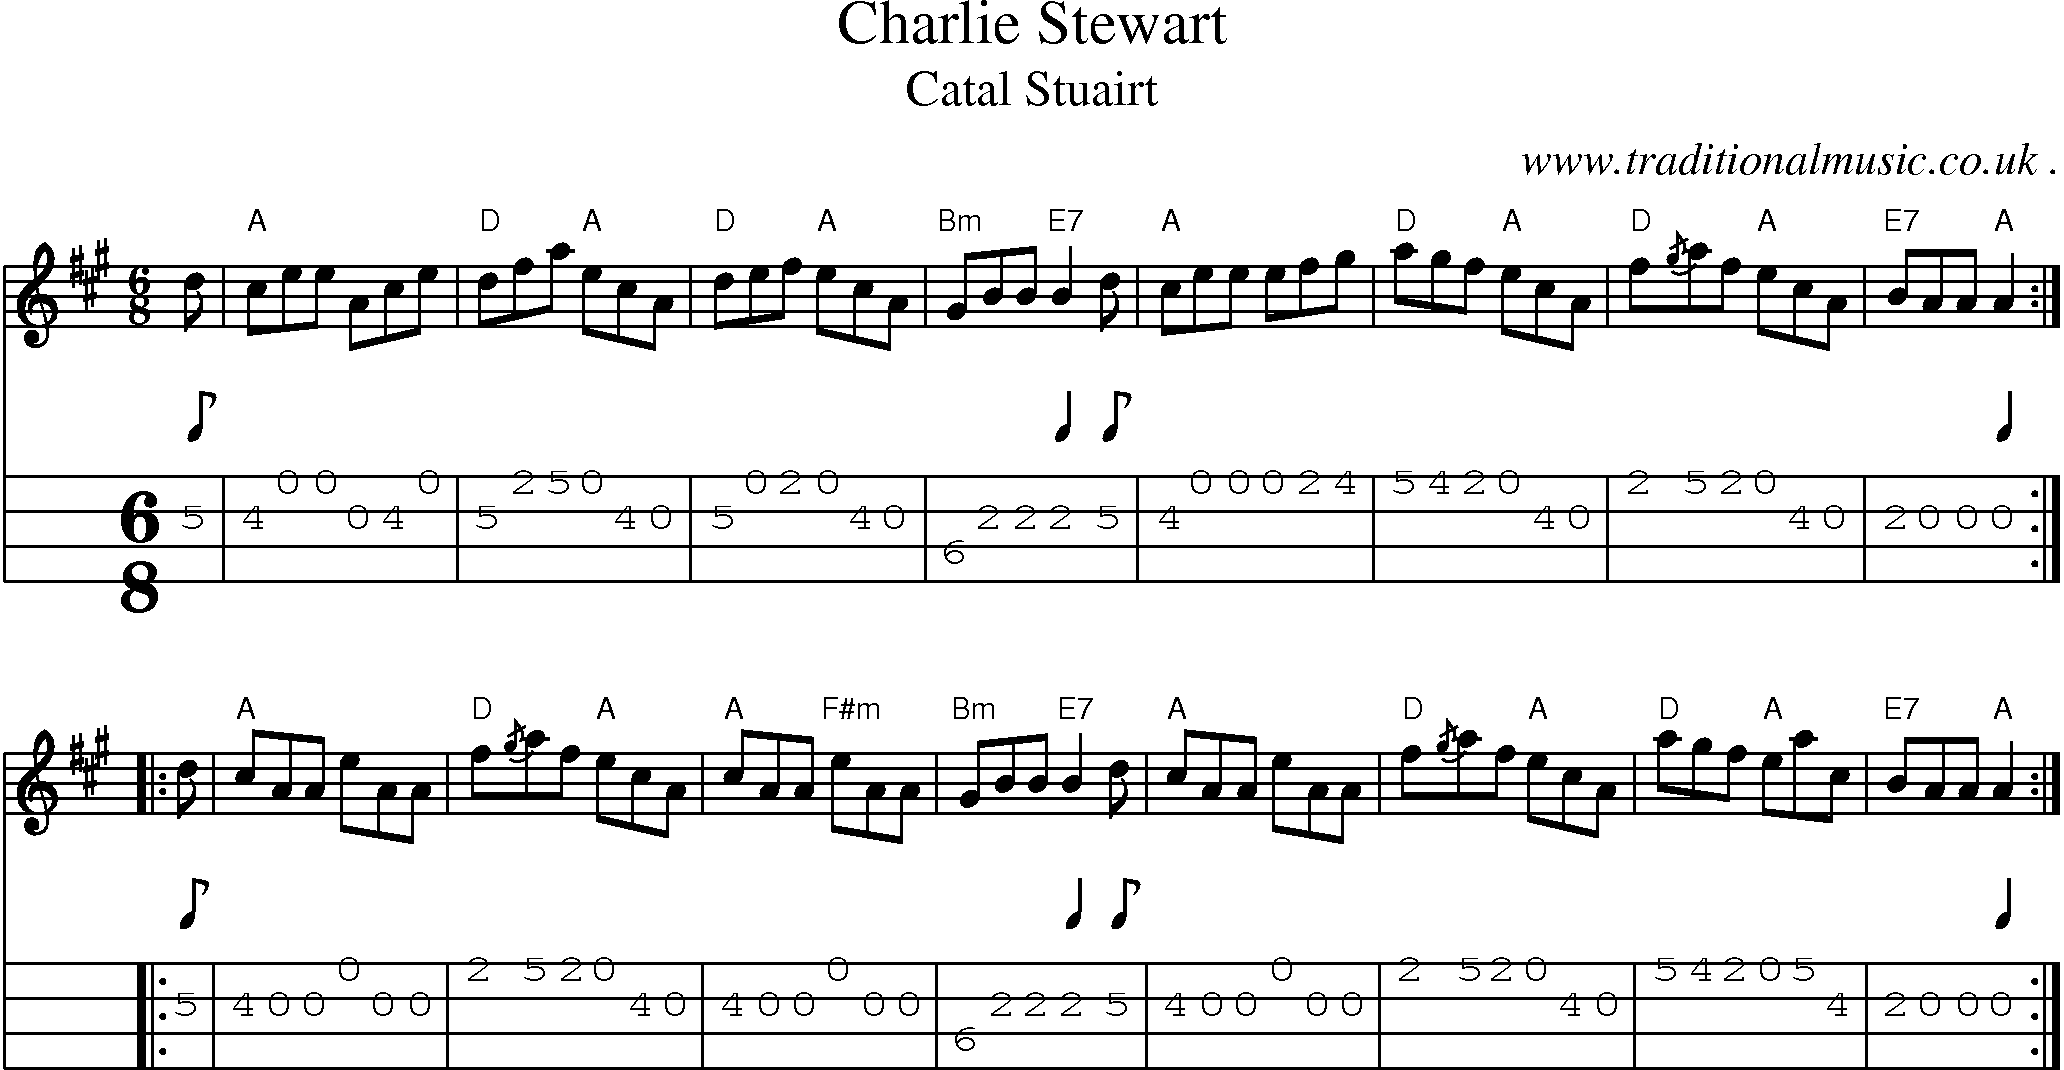 Sheet-music  score, Chords and Mandolin Tabs for Charlie Stewart